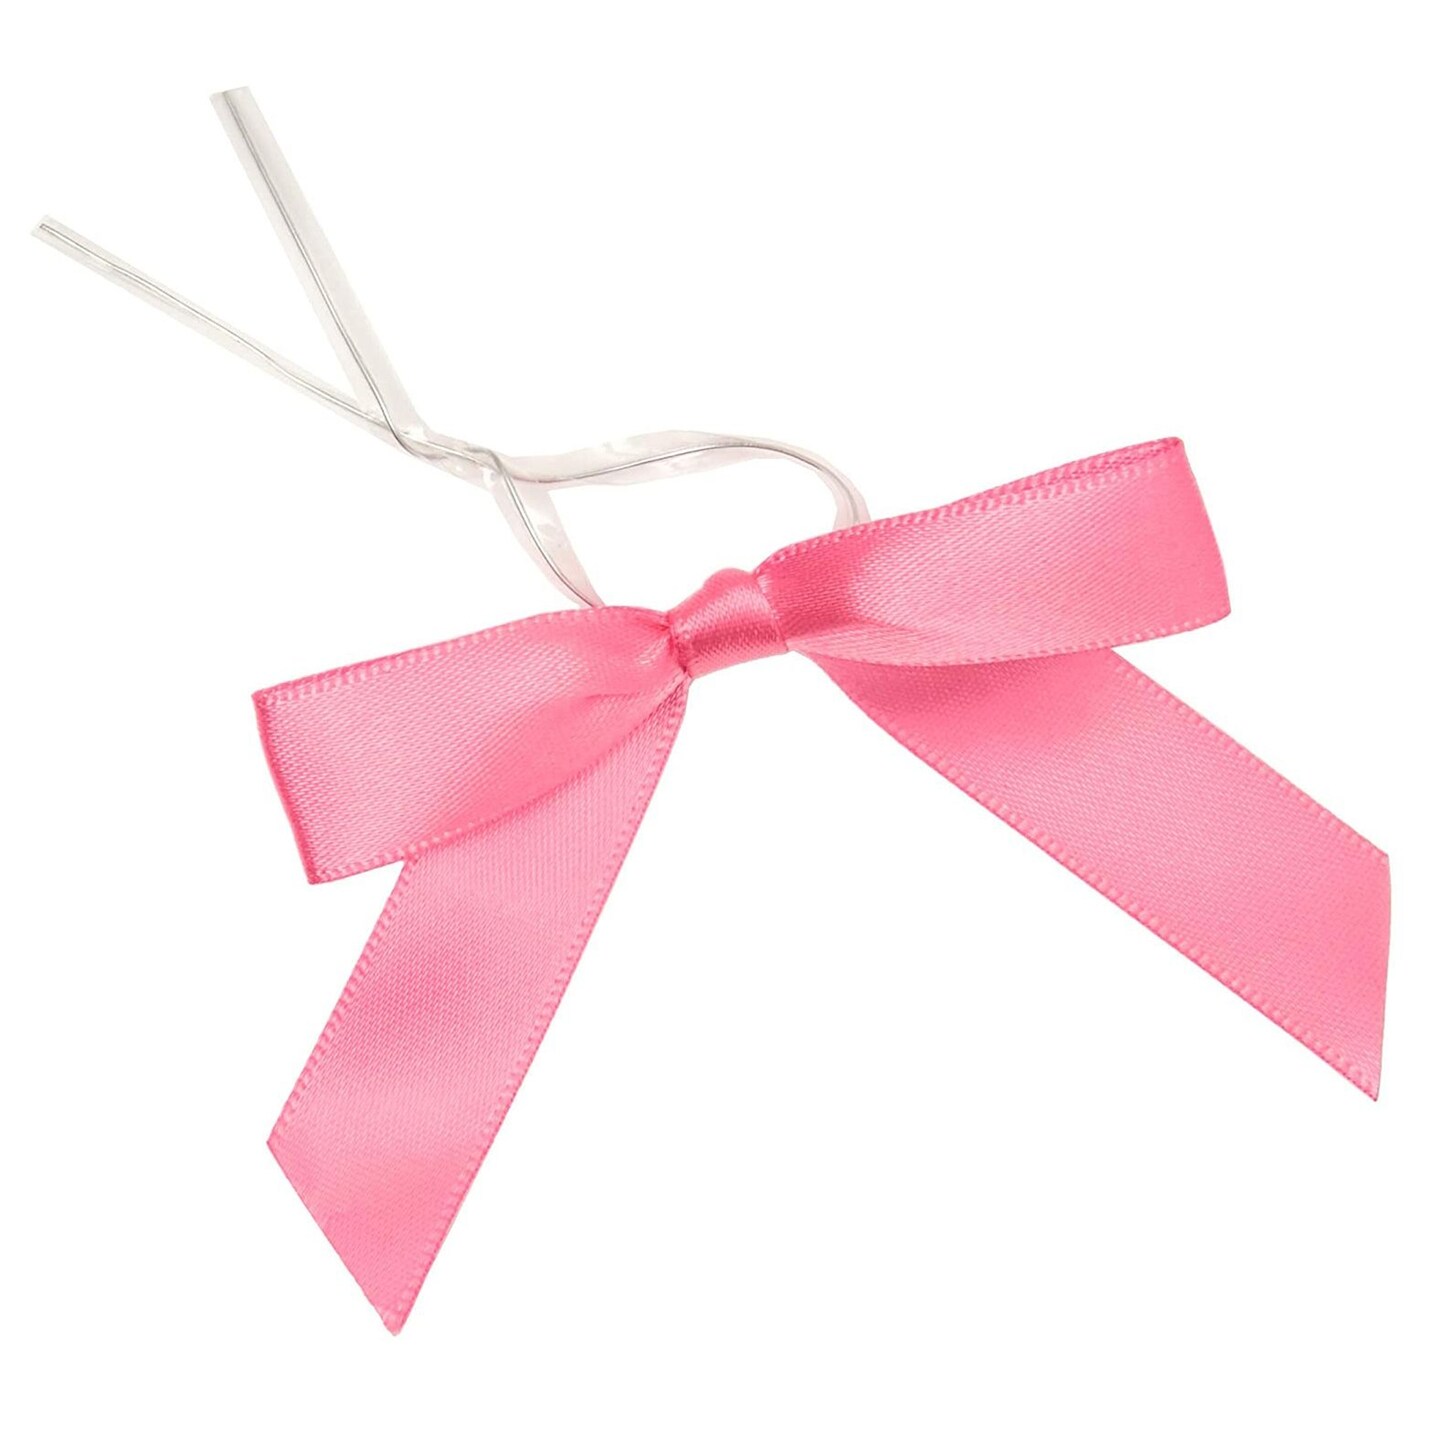  10pcs Ribbon for Bows Gift Wrapping Bow Metallic Bows Presents  Bows Ribbon for Hair Bows Ribbon for Wreaths Ribbon Bows Pink Flower  Garland Ribbon Gift Wrapping Flowers Flash : Health 